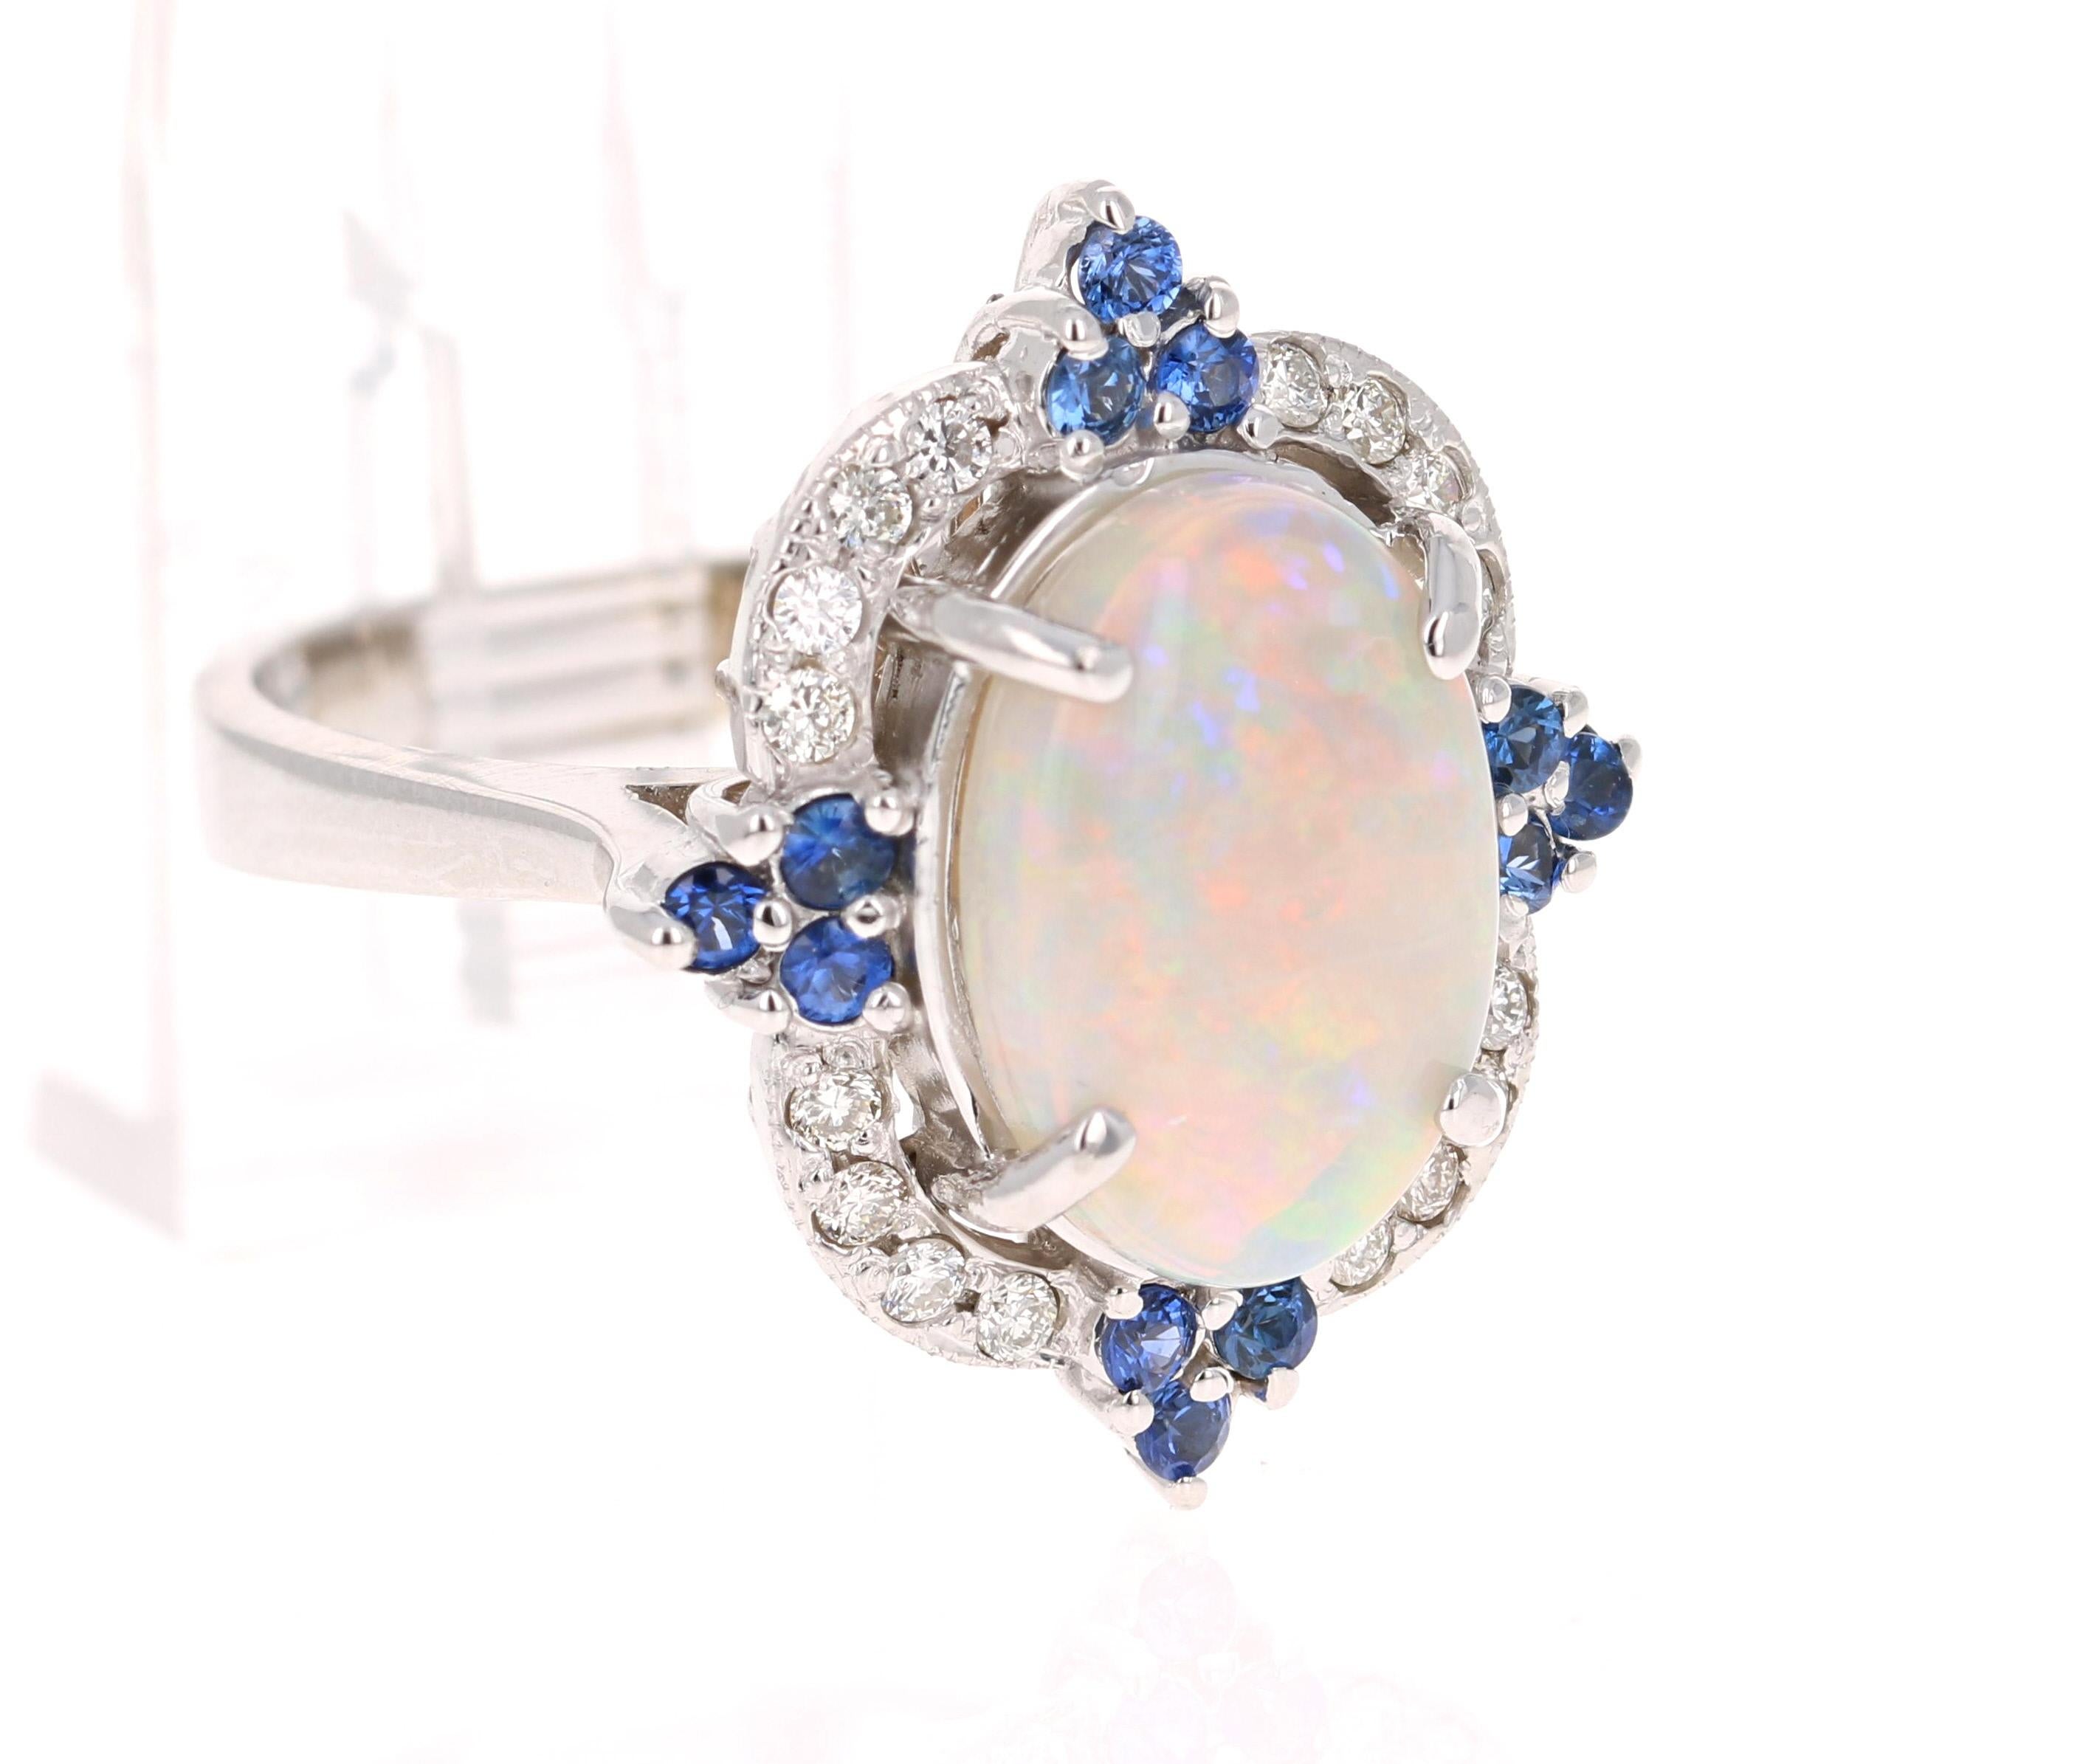 Opulent Opal, Blue Sapphire and Diamond Ring in 14K White Gold.

The beautiful Oval Cut, Ethiopian-Origin Opal with its striking flashes of color weighs 3.57 Carats. The Opal has flashes of color ranging from green, orange, yellow and red.  It is